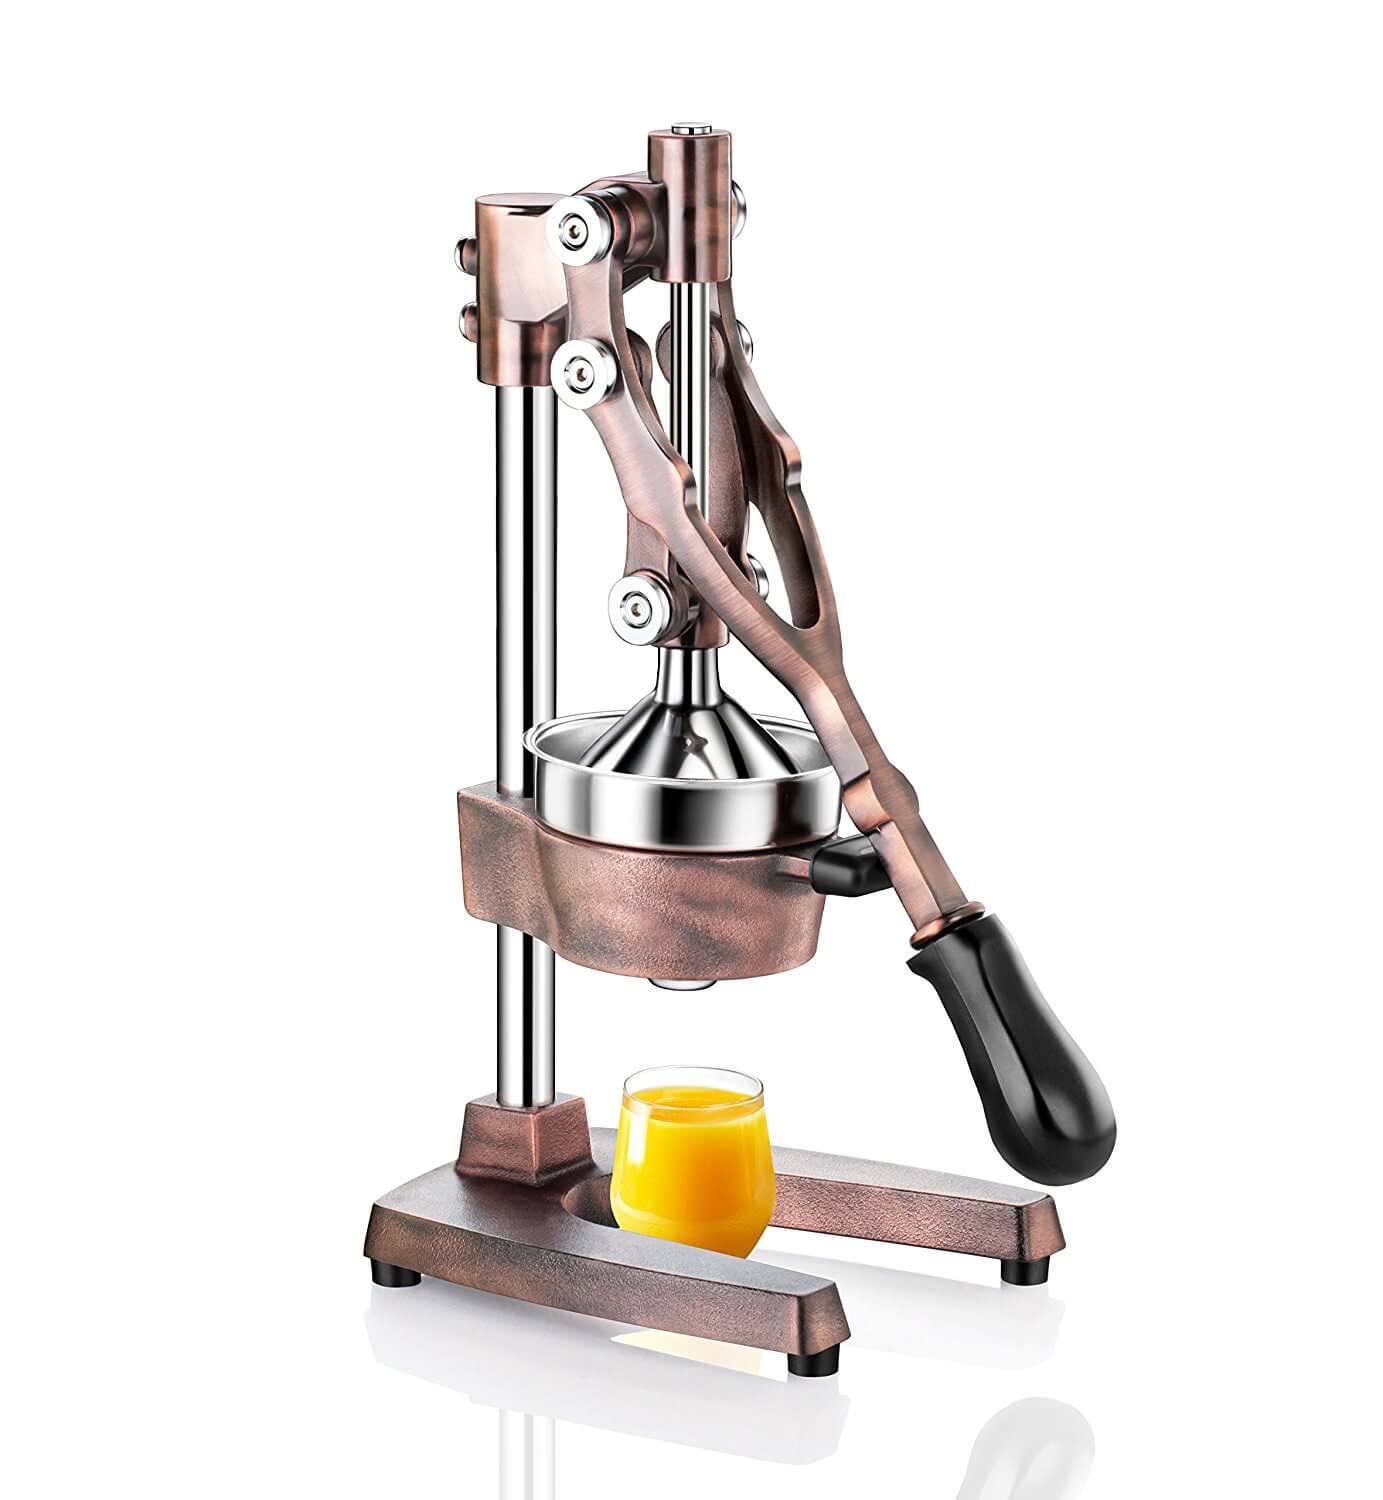 New Star Foodservice 46885 Commercial Citrus Juicer